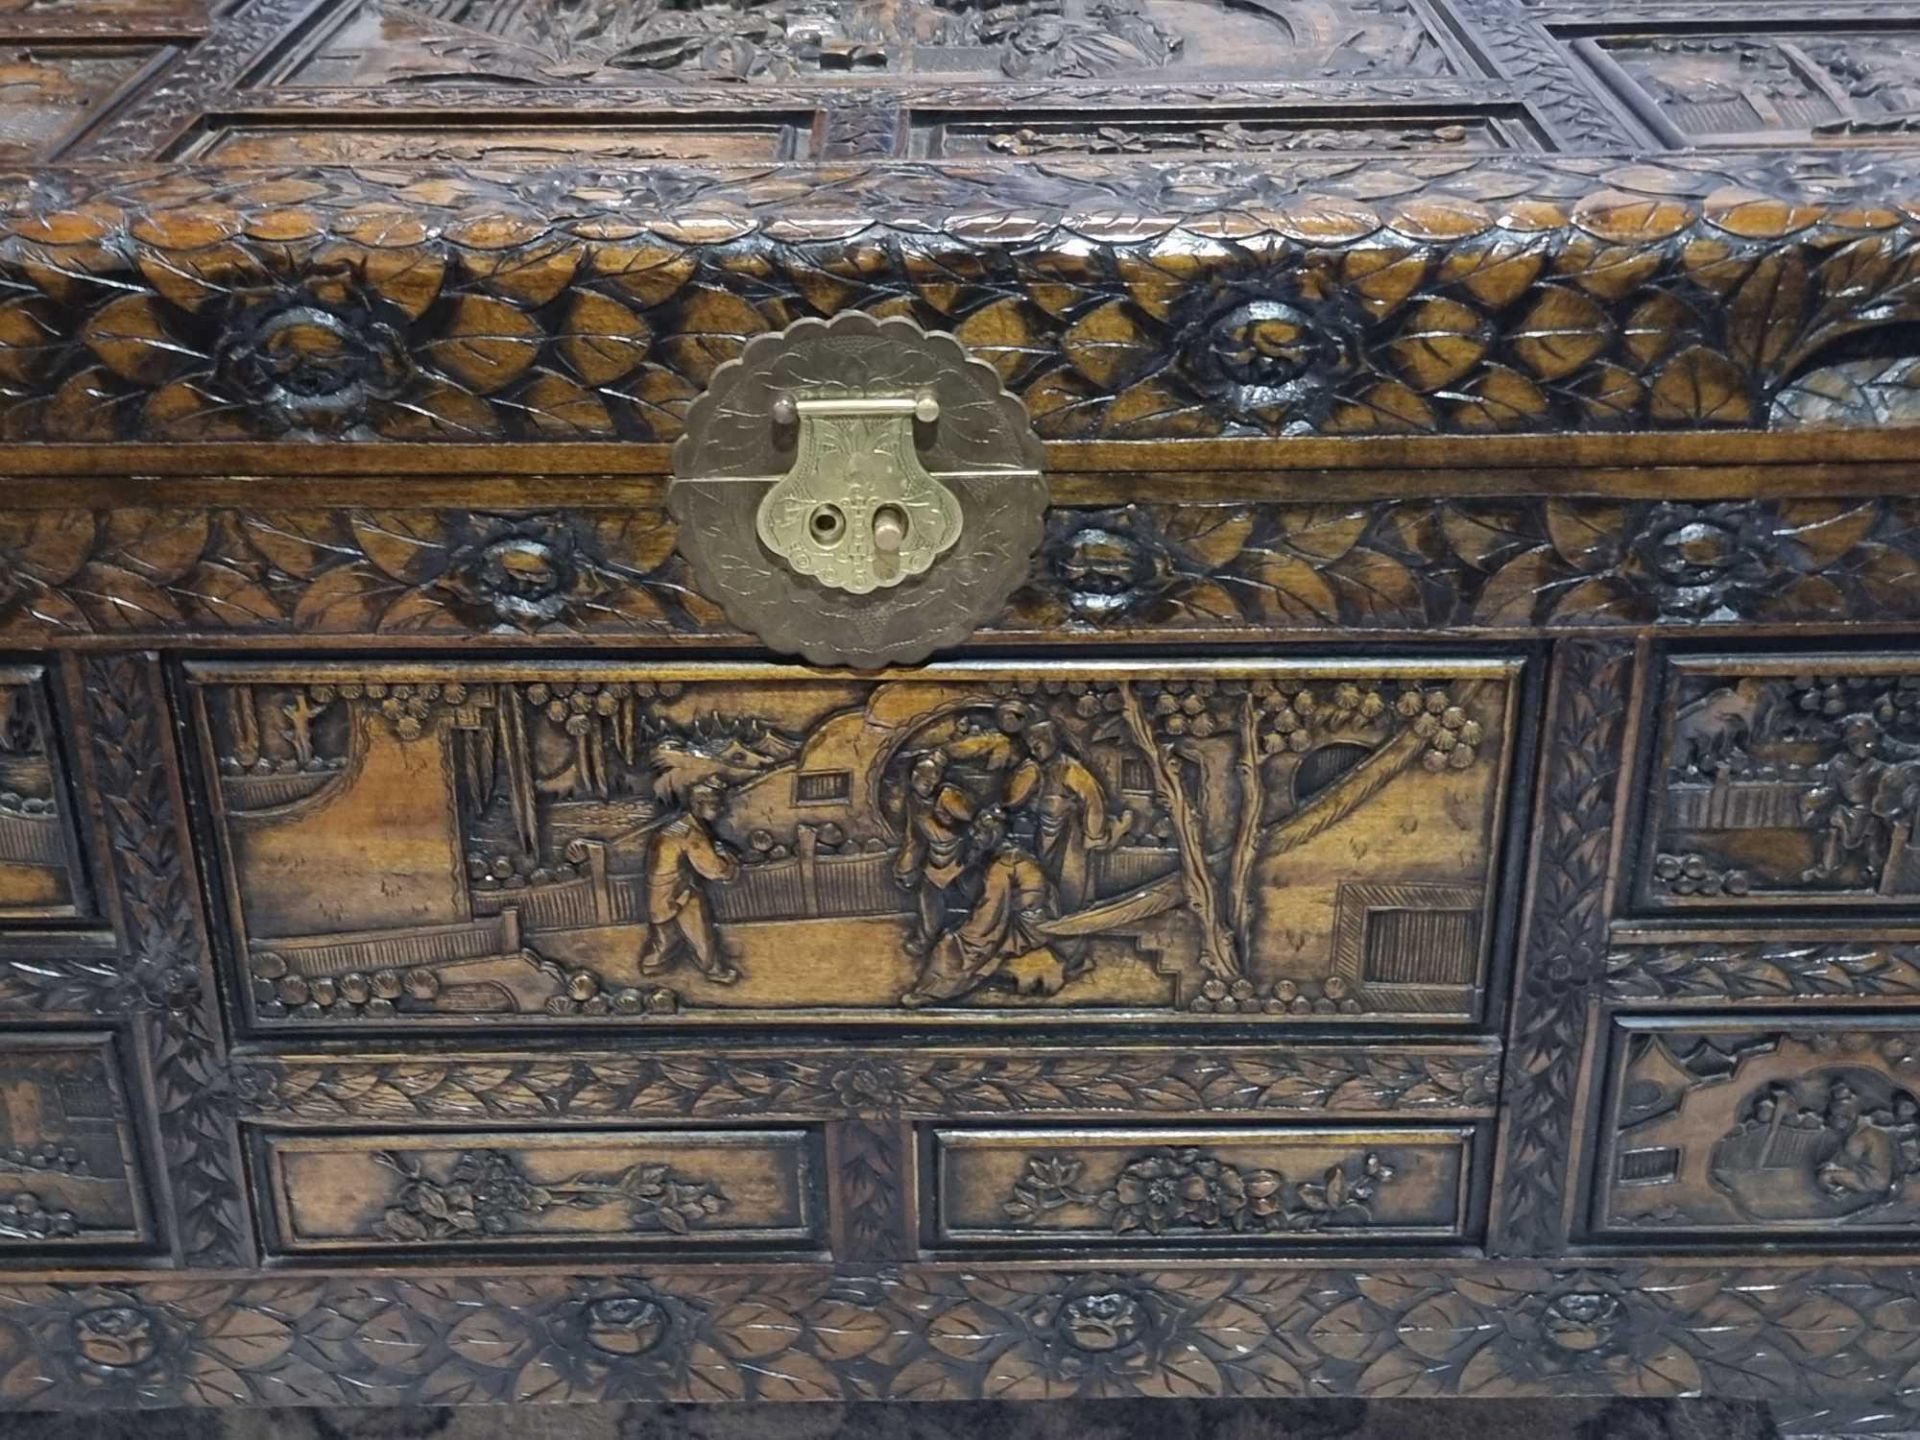 Early 20th Century Oriental Carved Camphor Wood Chest With Various Scenes Carved In Deep Relief. - Image 5 of 10